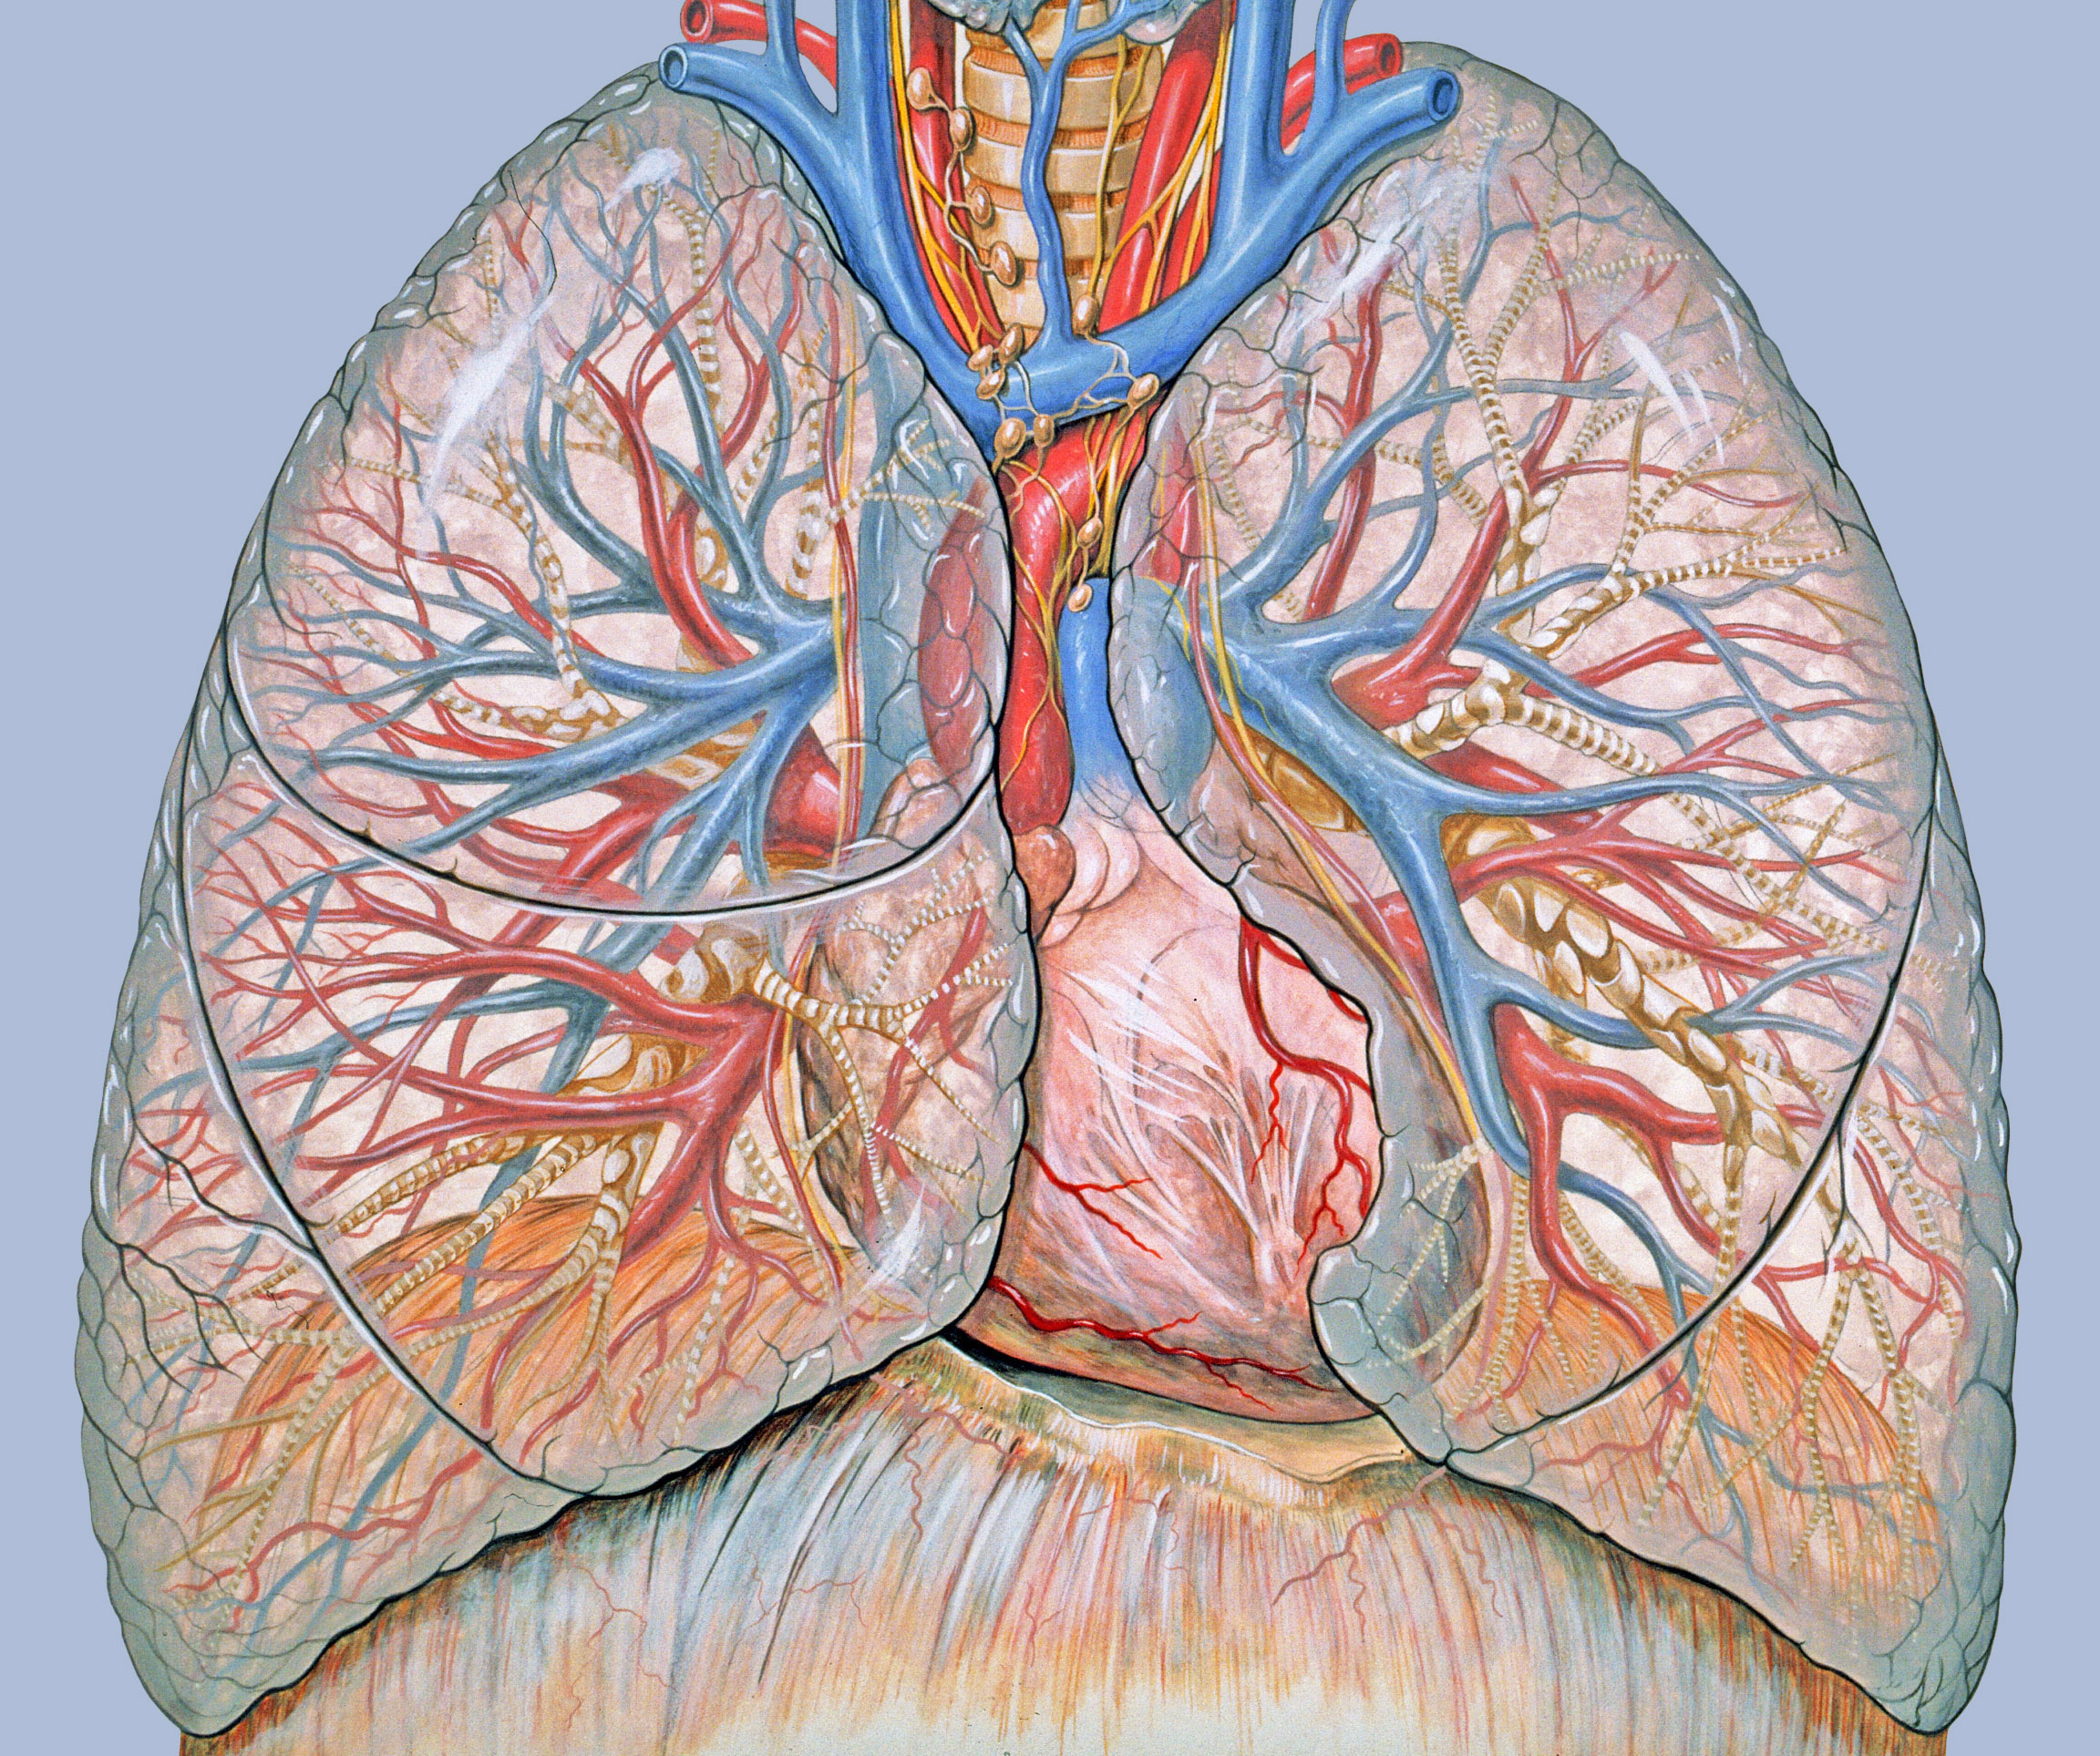 Sign of Lung Cancer